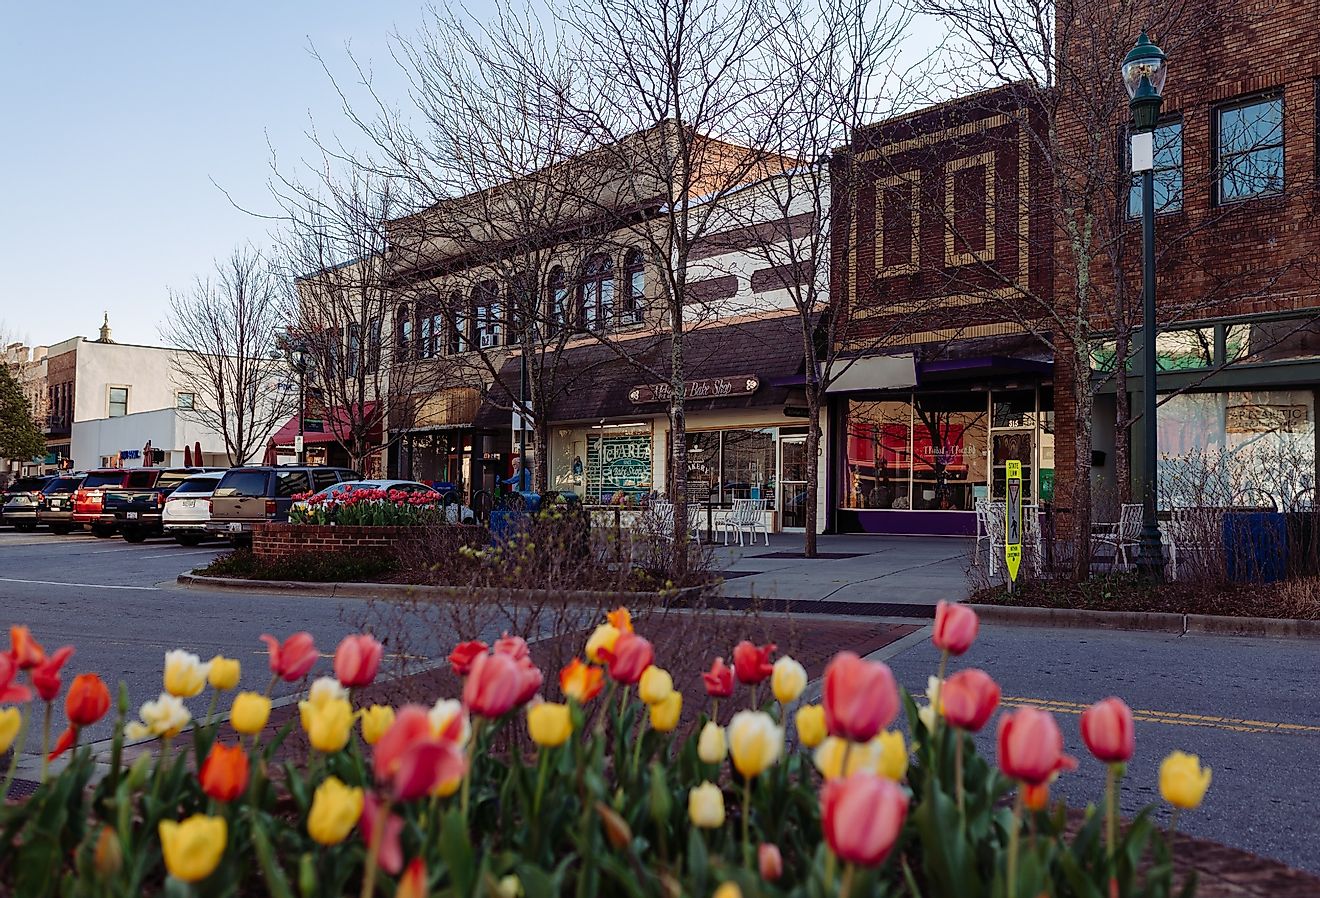 The day before Easter in Hendersonville, North Carolina. Image credit MILA PARH via Shutterstock